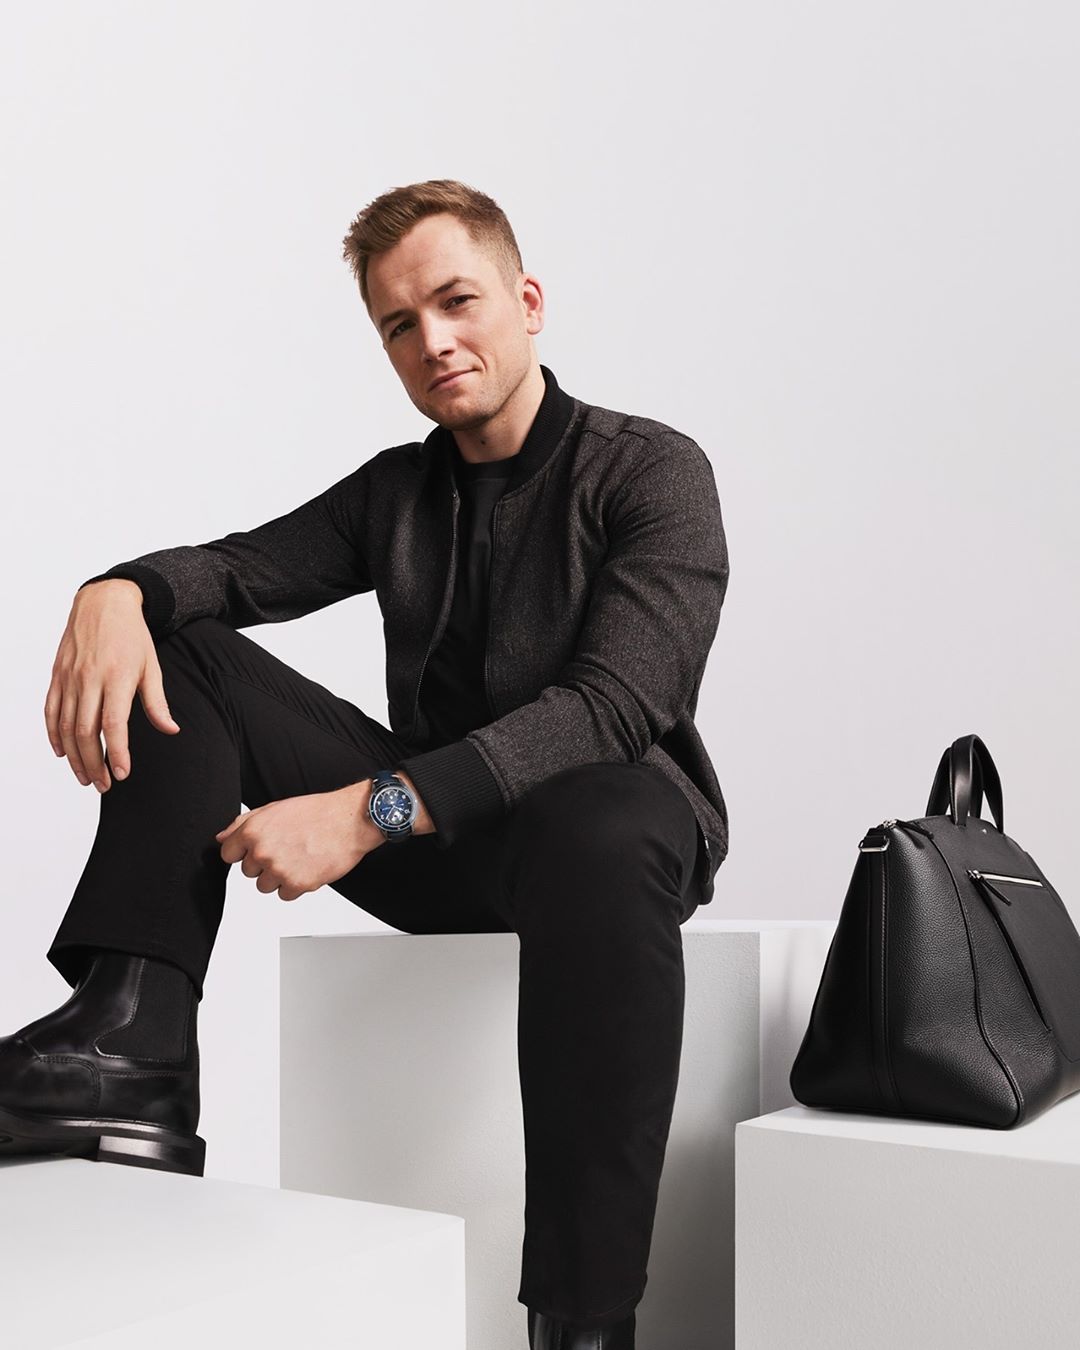 Montblanc - A new face of success.
.
Not one to stick with the tried and trusted, lead actor Taron Egerton is always looking for that new challenging role. Embodying the spirit of exploration right on...